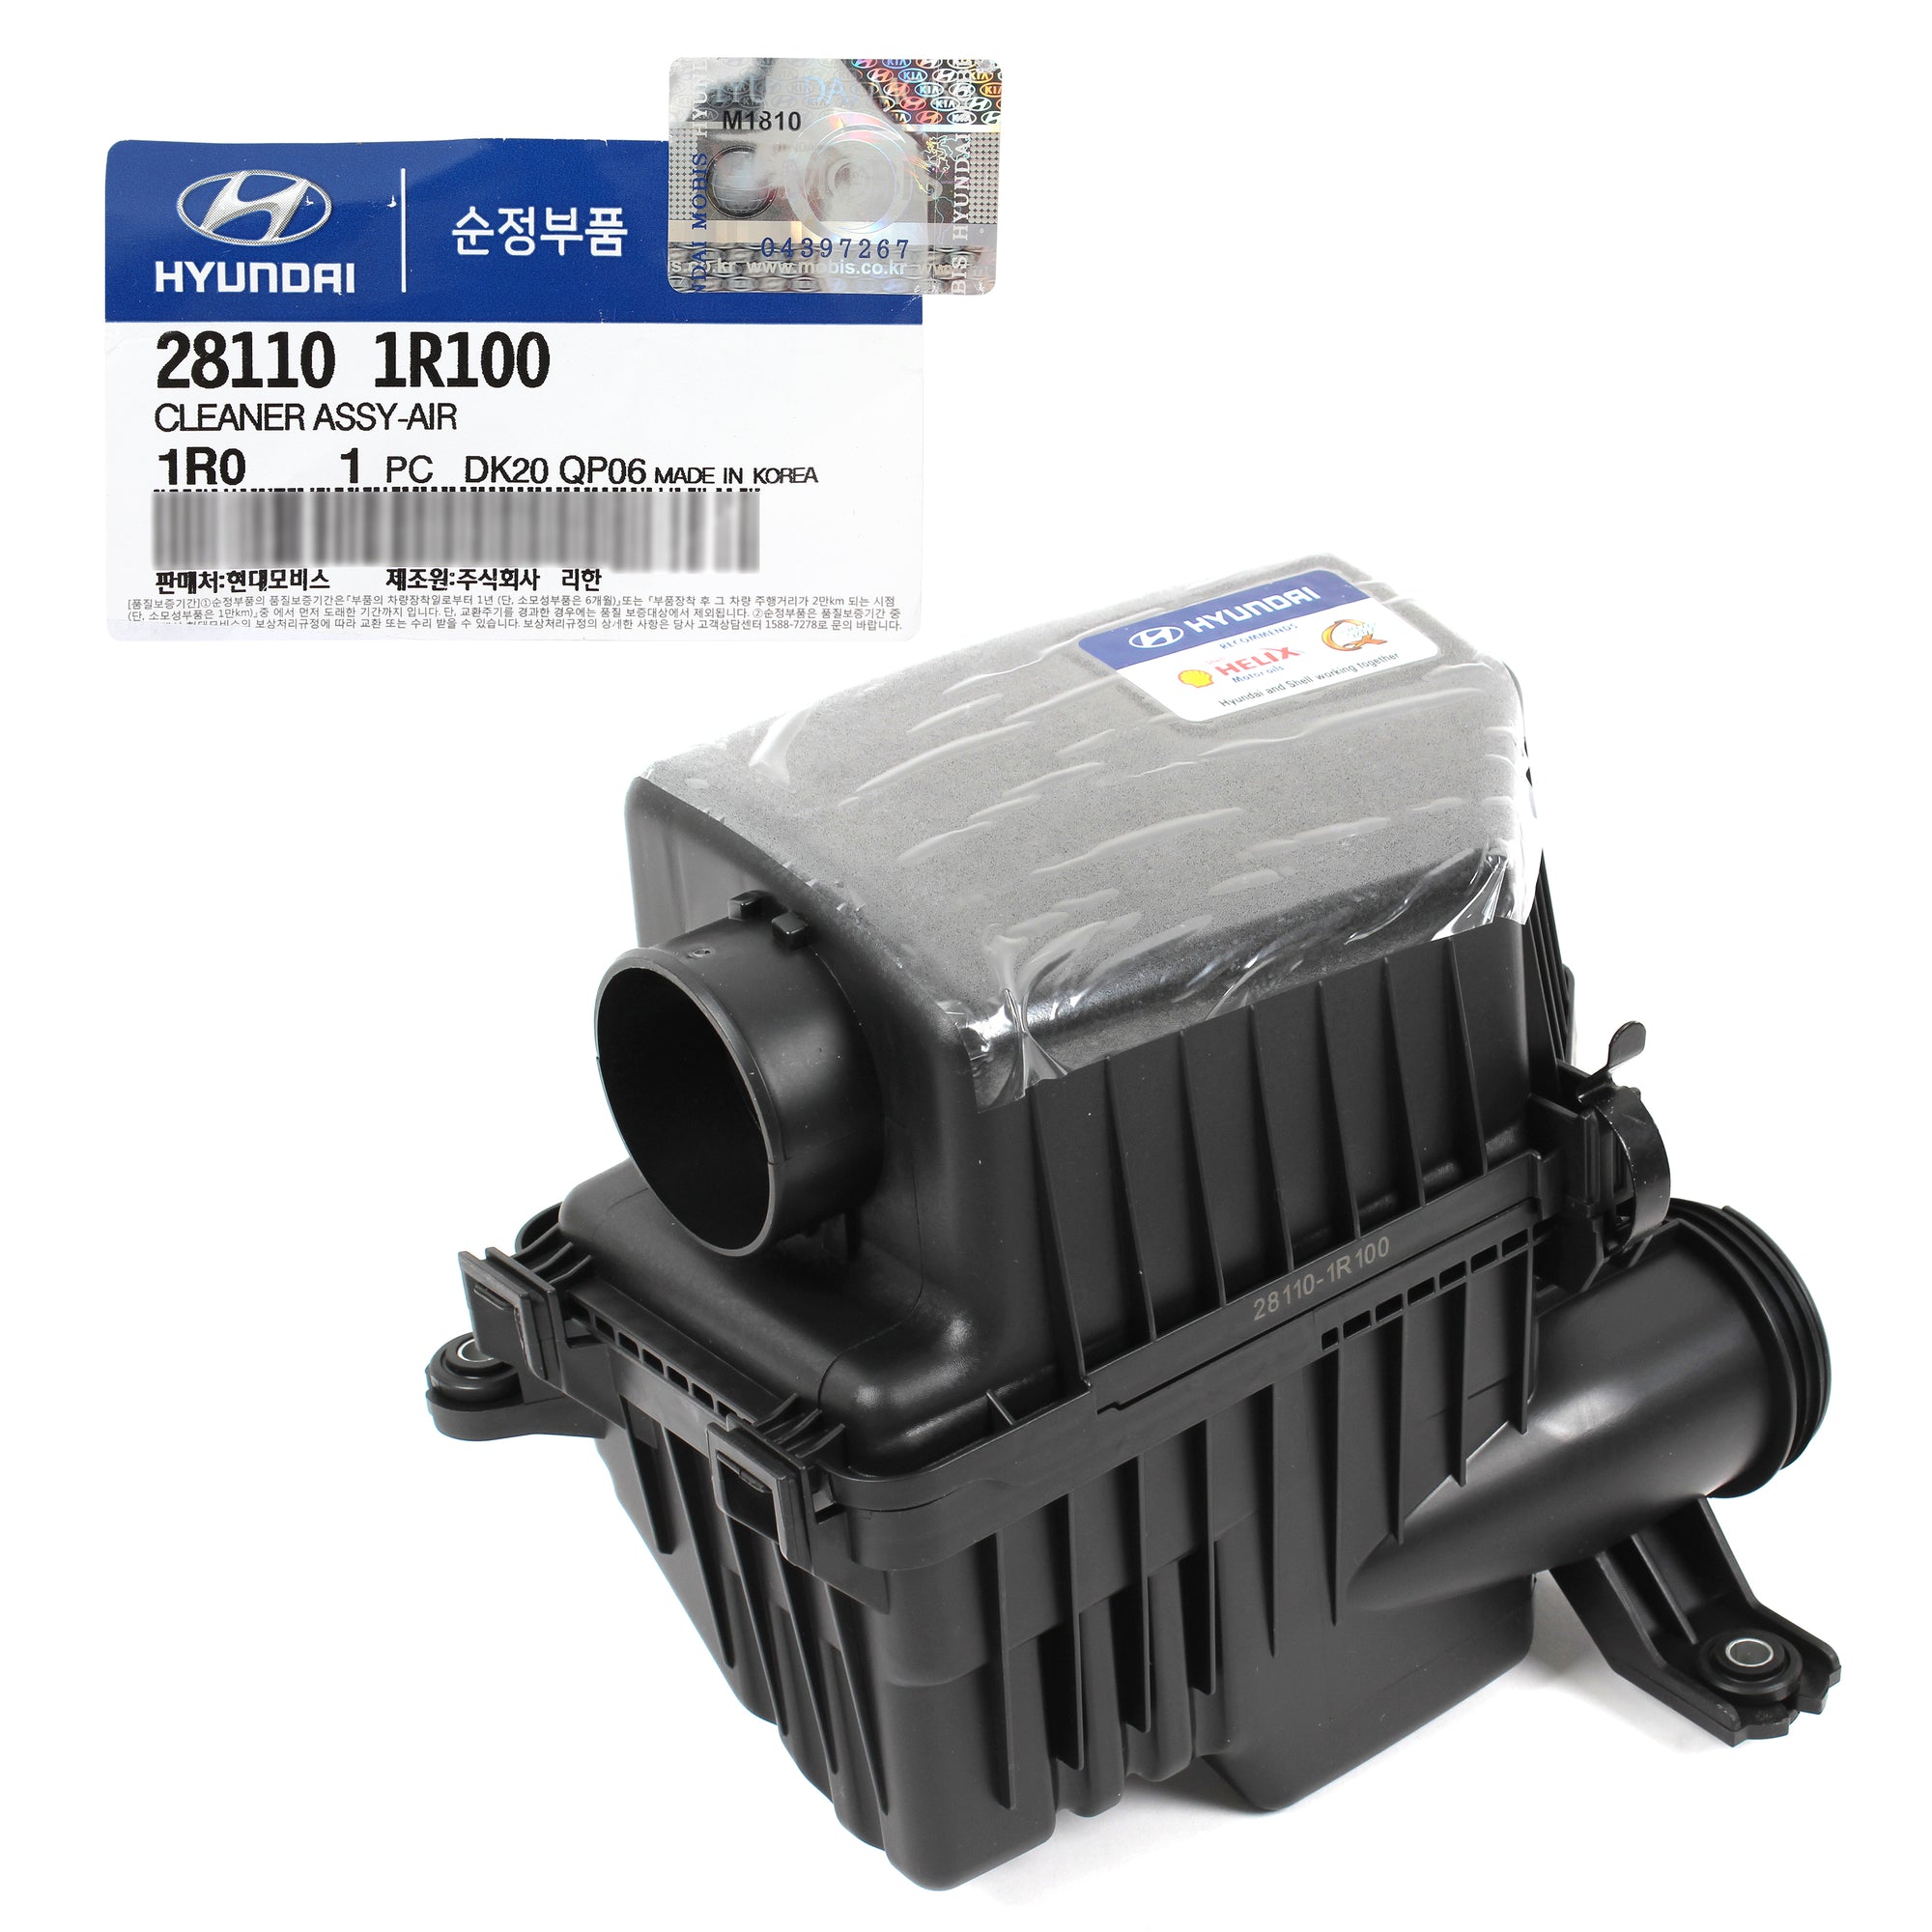 GENUINE Air Cleaner Intake Assy for 12-17 Hyundai Accent Veloster OEM 281101R100